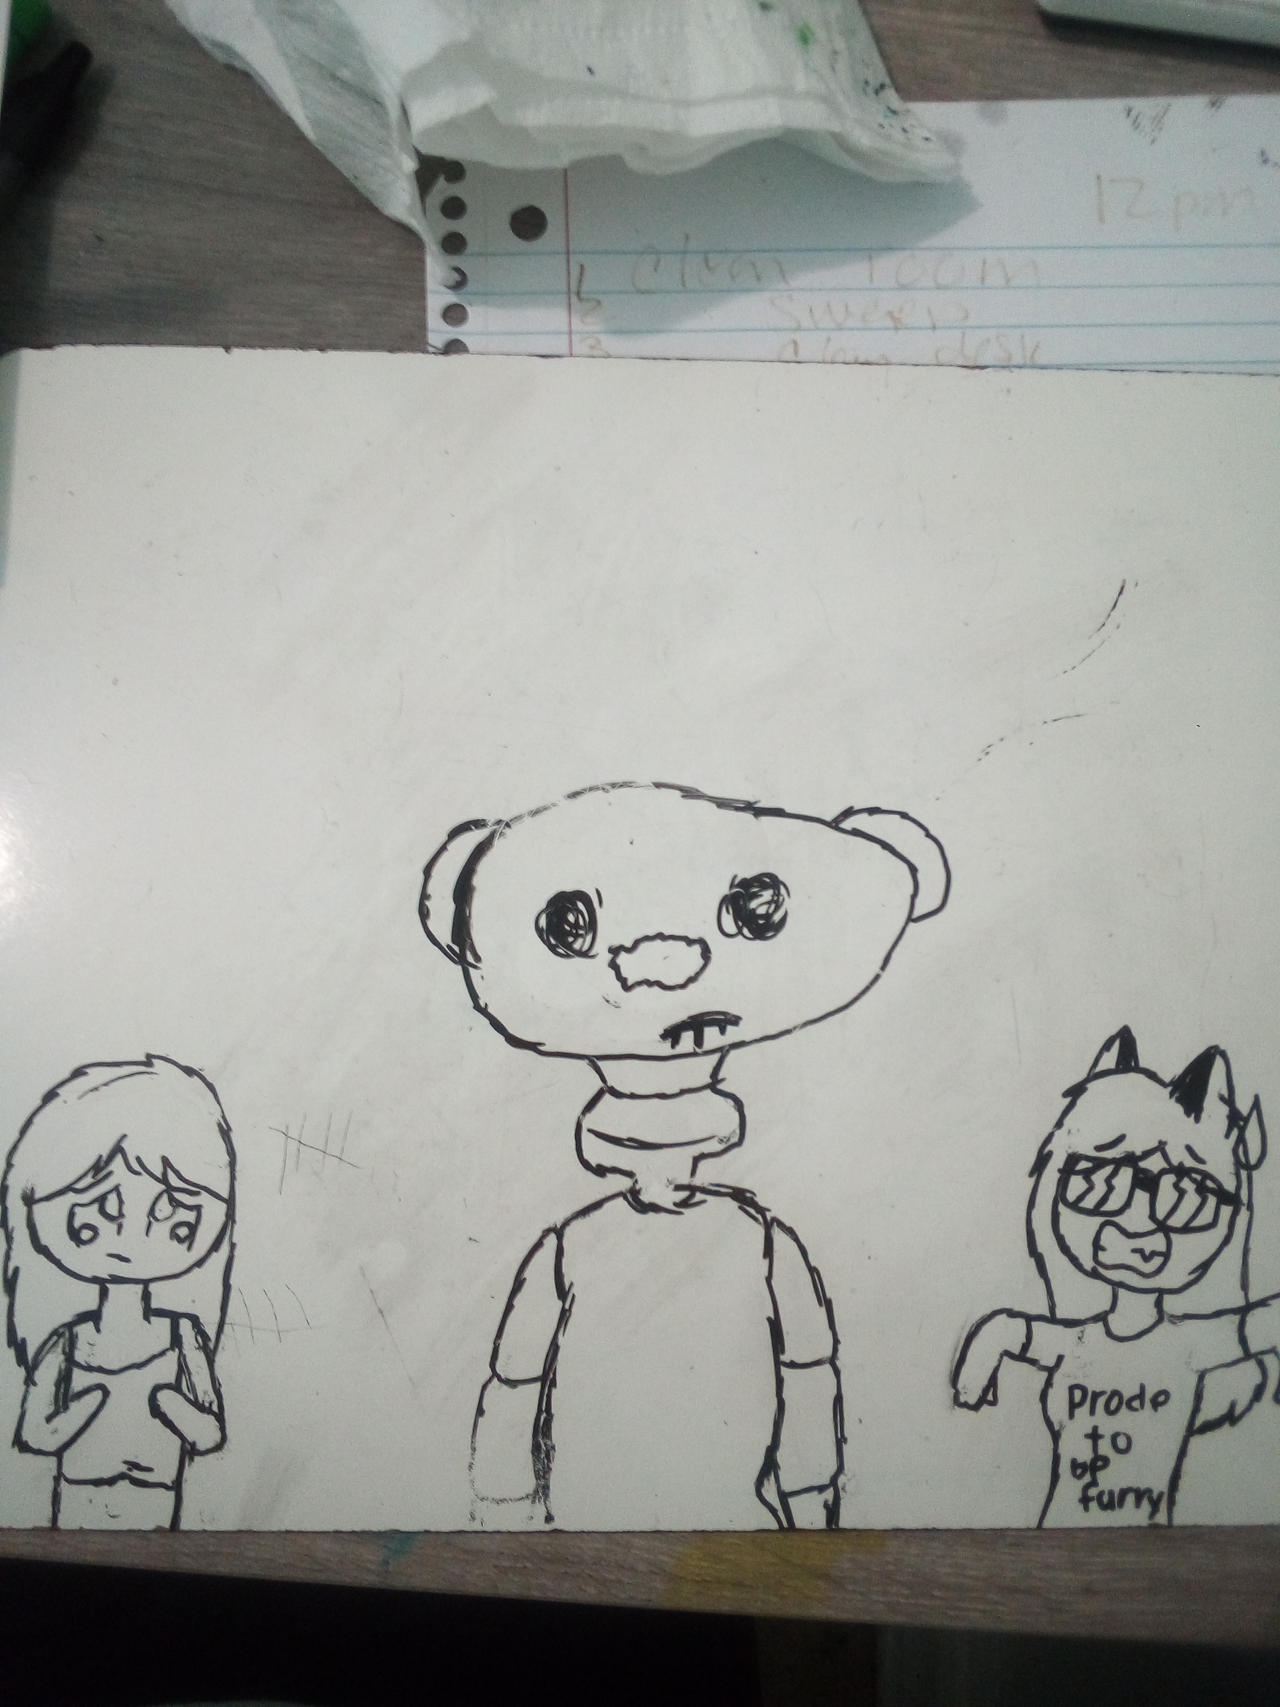 A Fan Art Draw Of The Roblox Game Bear By Tem123456 On Deviantart - bear roblox game